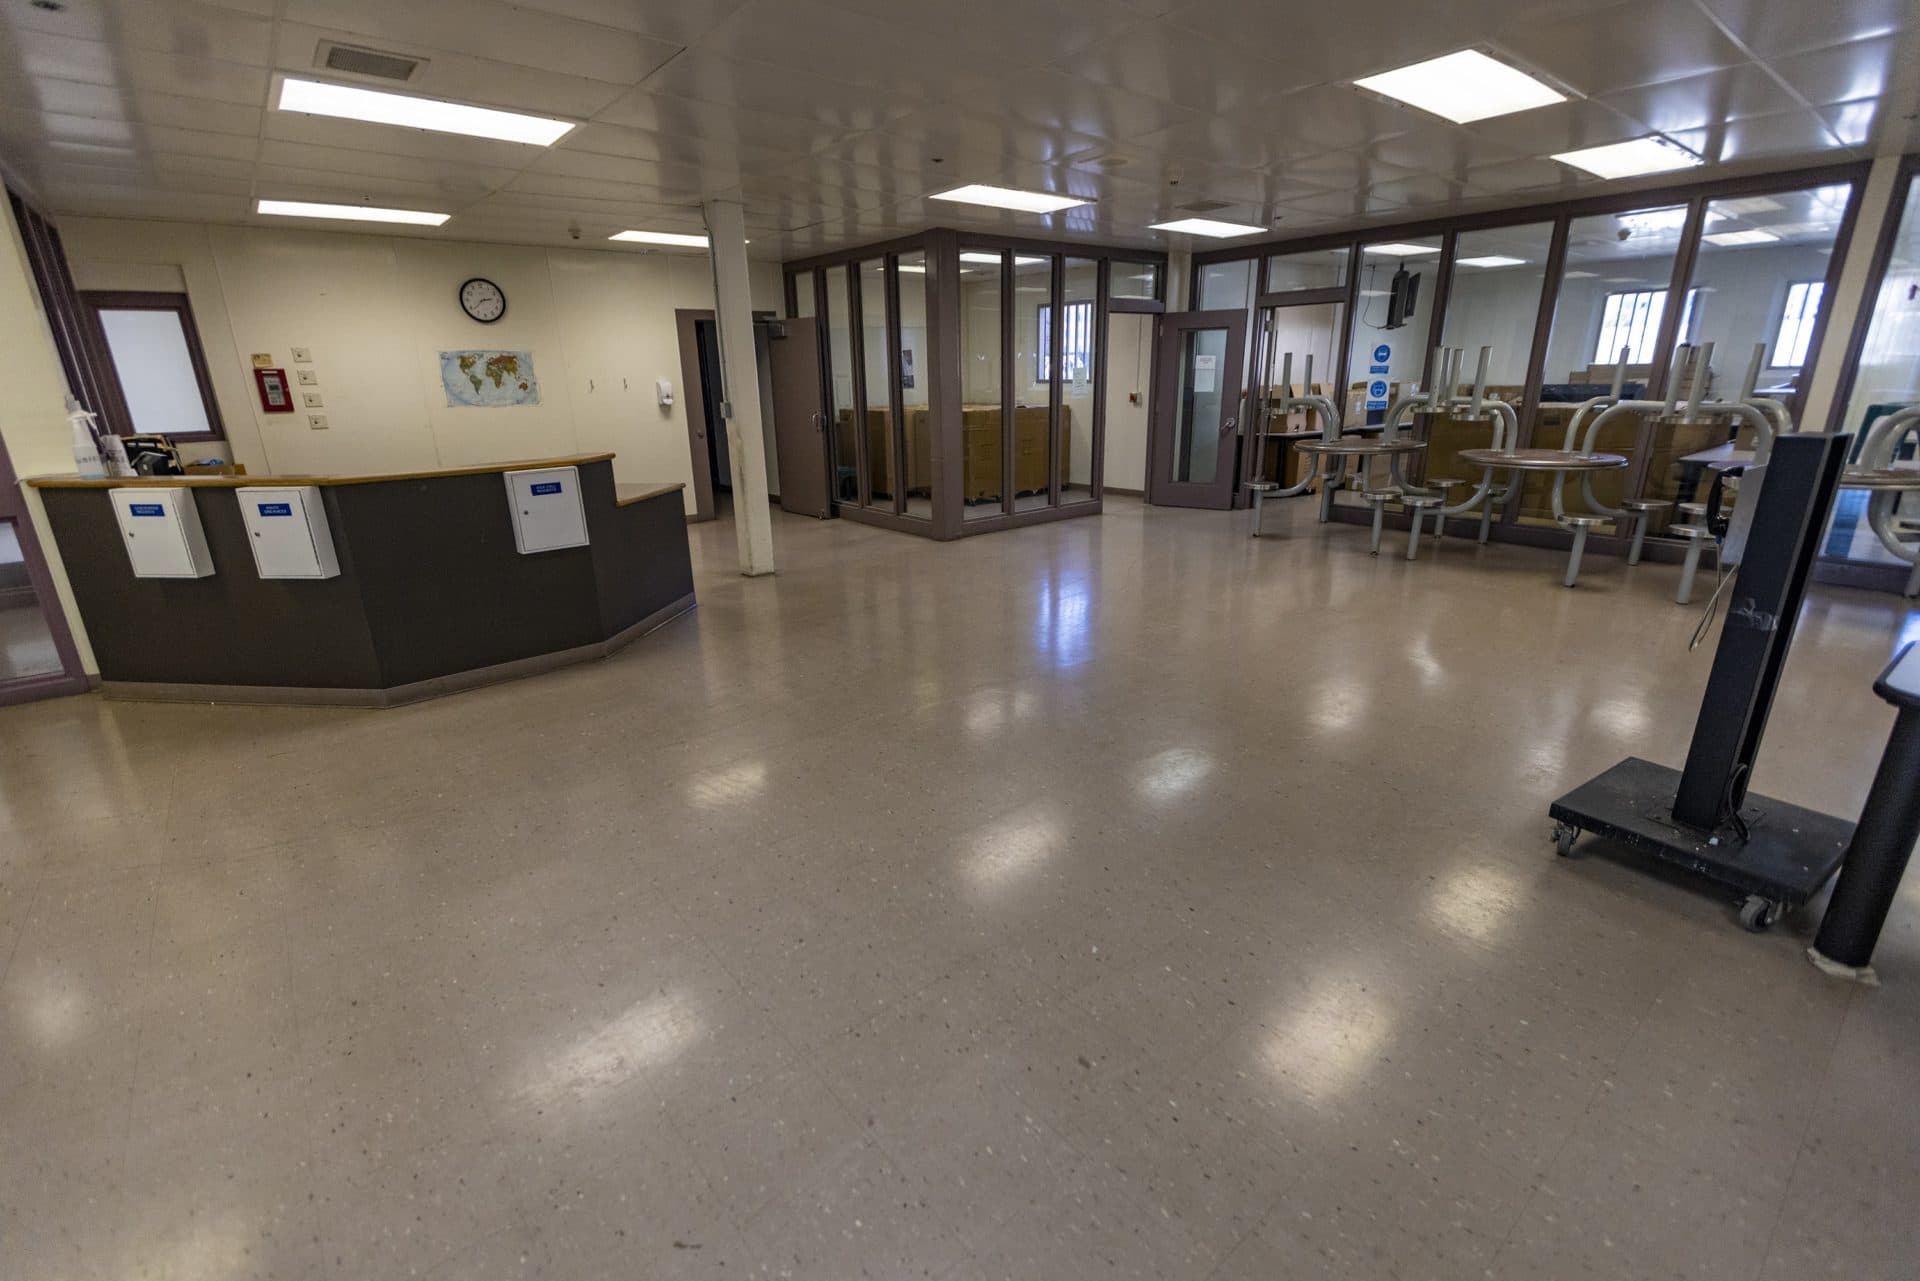 A common room inside a building owned by the Suffolk County Sheriff's Department that Sheriff Steve Tompkins says will serve as housing for some people living on the streets near Massachusetts Avenue and Melnea Cass Boulevard. (Jesse Costa/WBUR)